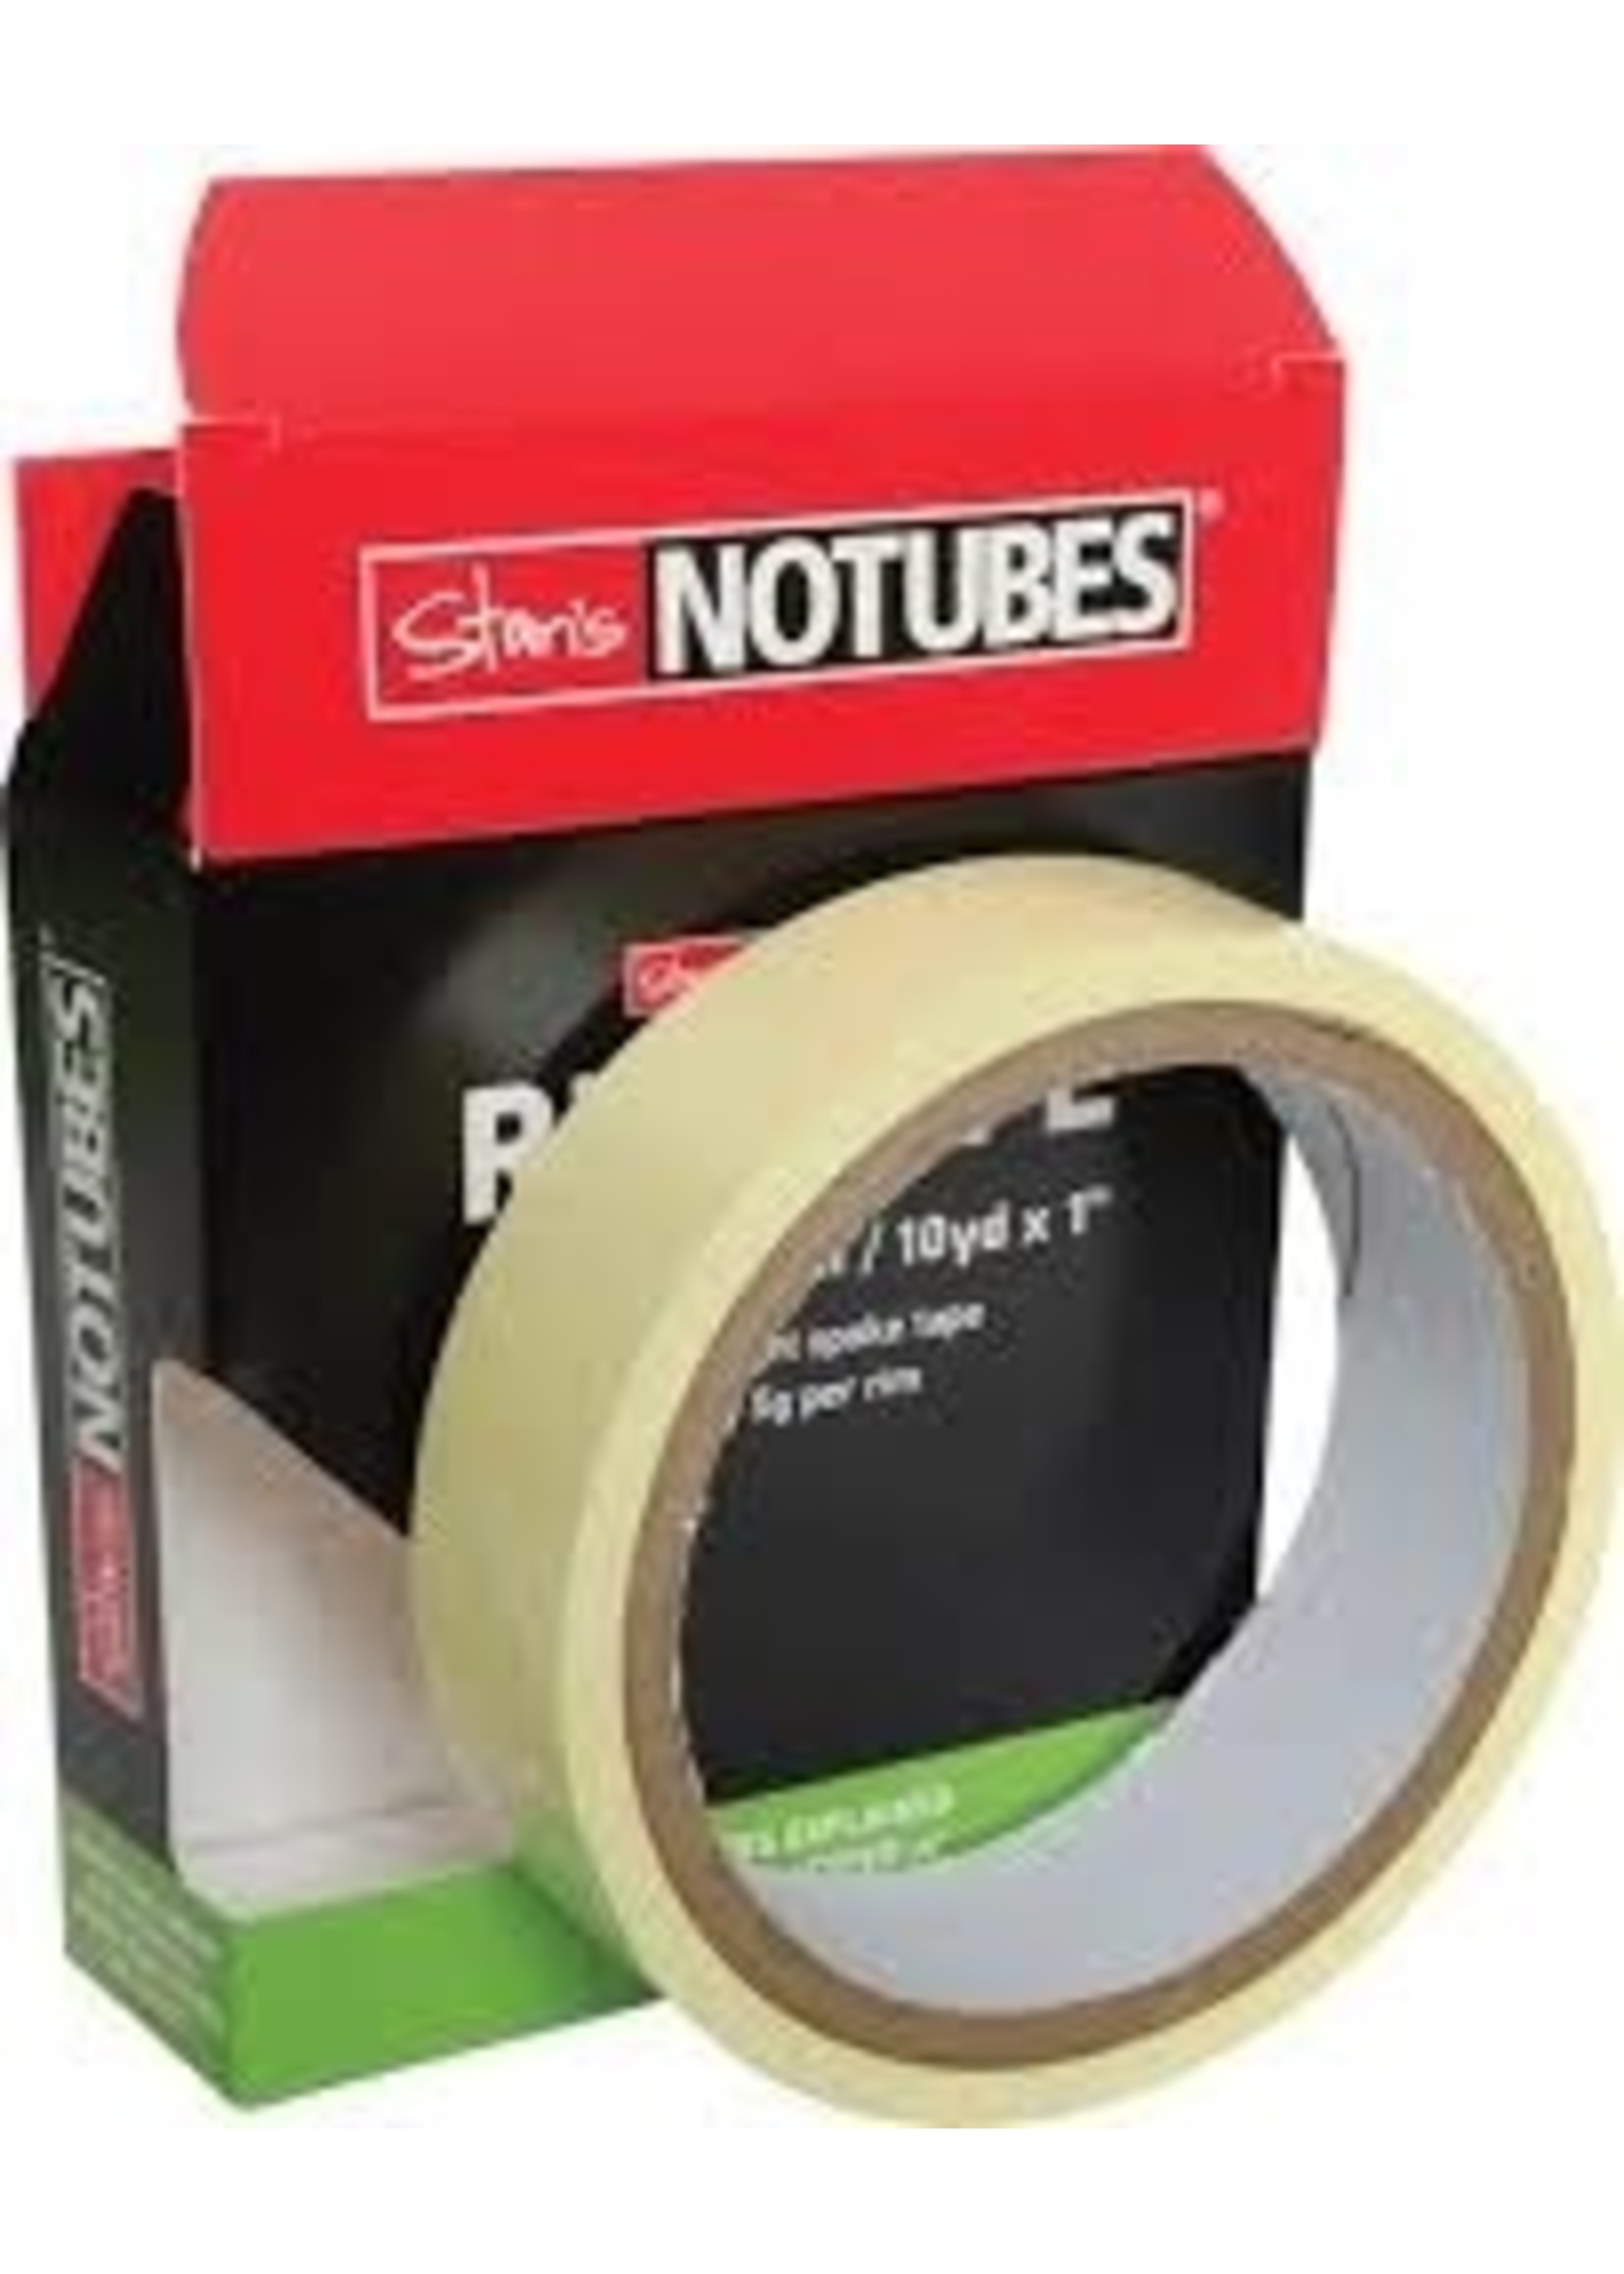 Stan's No Tubes 33mm x 9.14m Yellow Rim Tape Roll Stans No Tubes